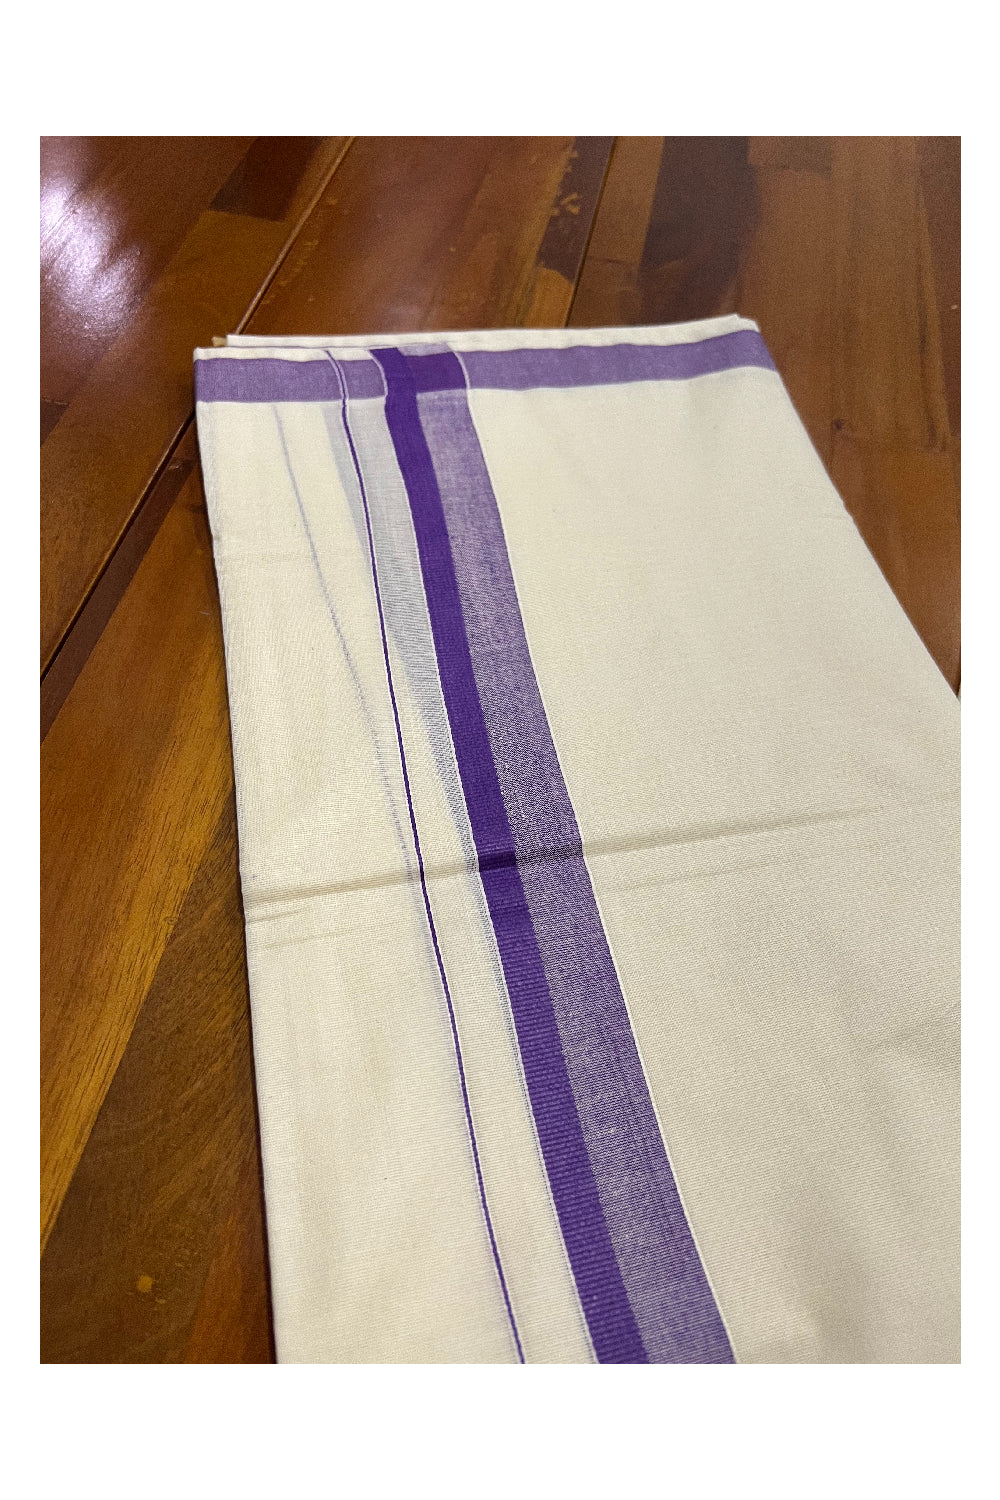 Off White Pure Cotton Double Mundu with Dark Violet Shaded Kara (South Indian Dhoti)